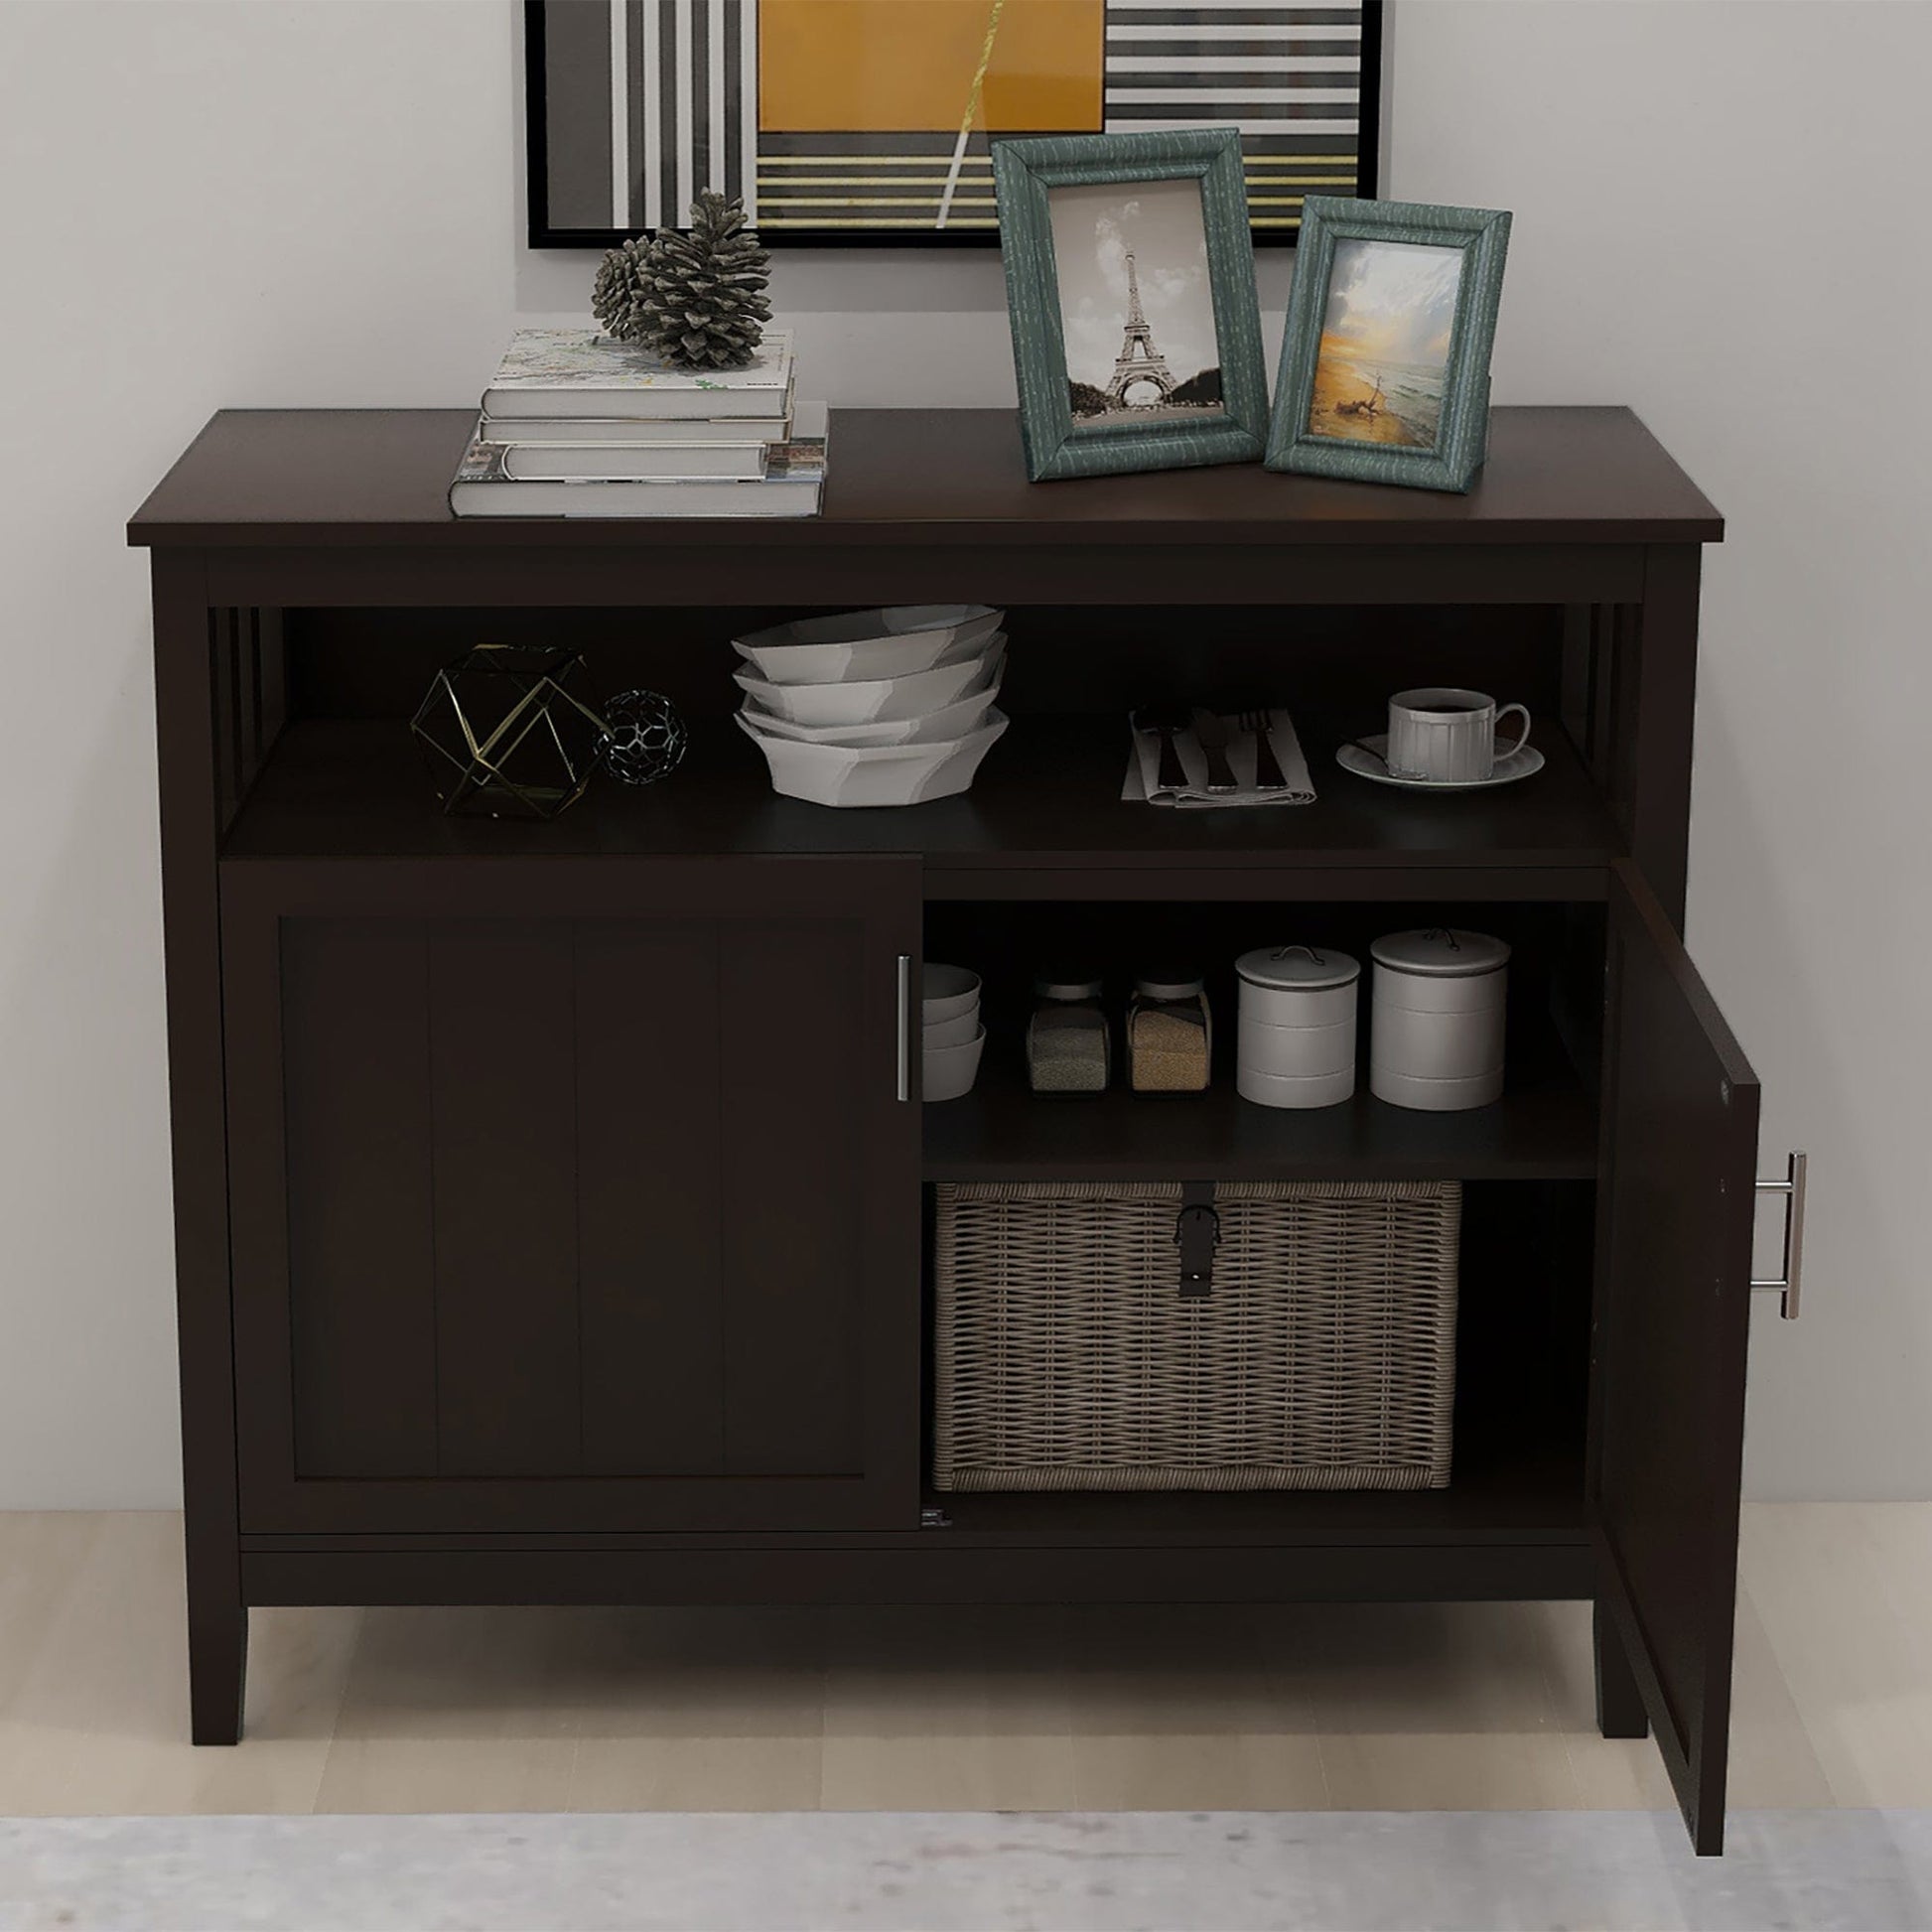 1st Choice Furniture Direct Sideboard Server 1st Choice Brown Kitchen Storage Sideboard And Buffet Server Cabinet